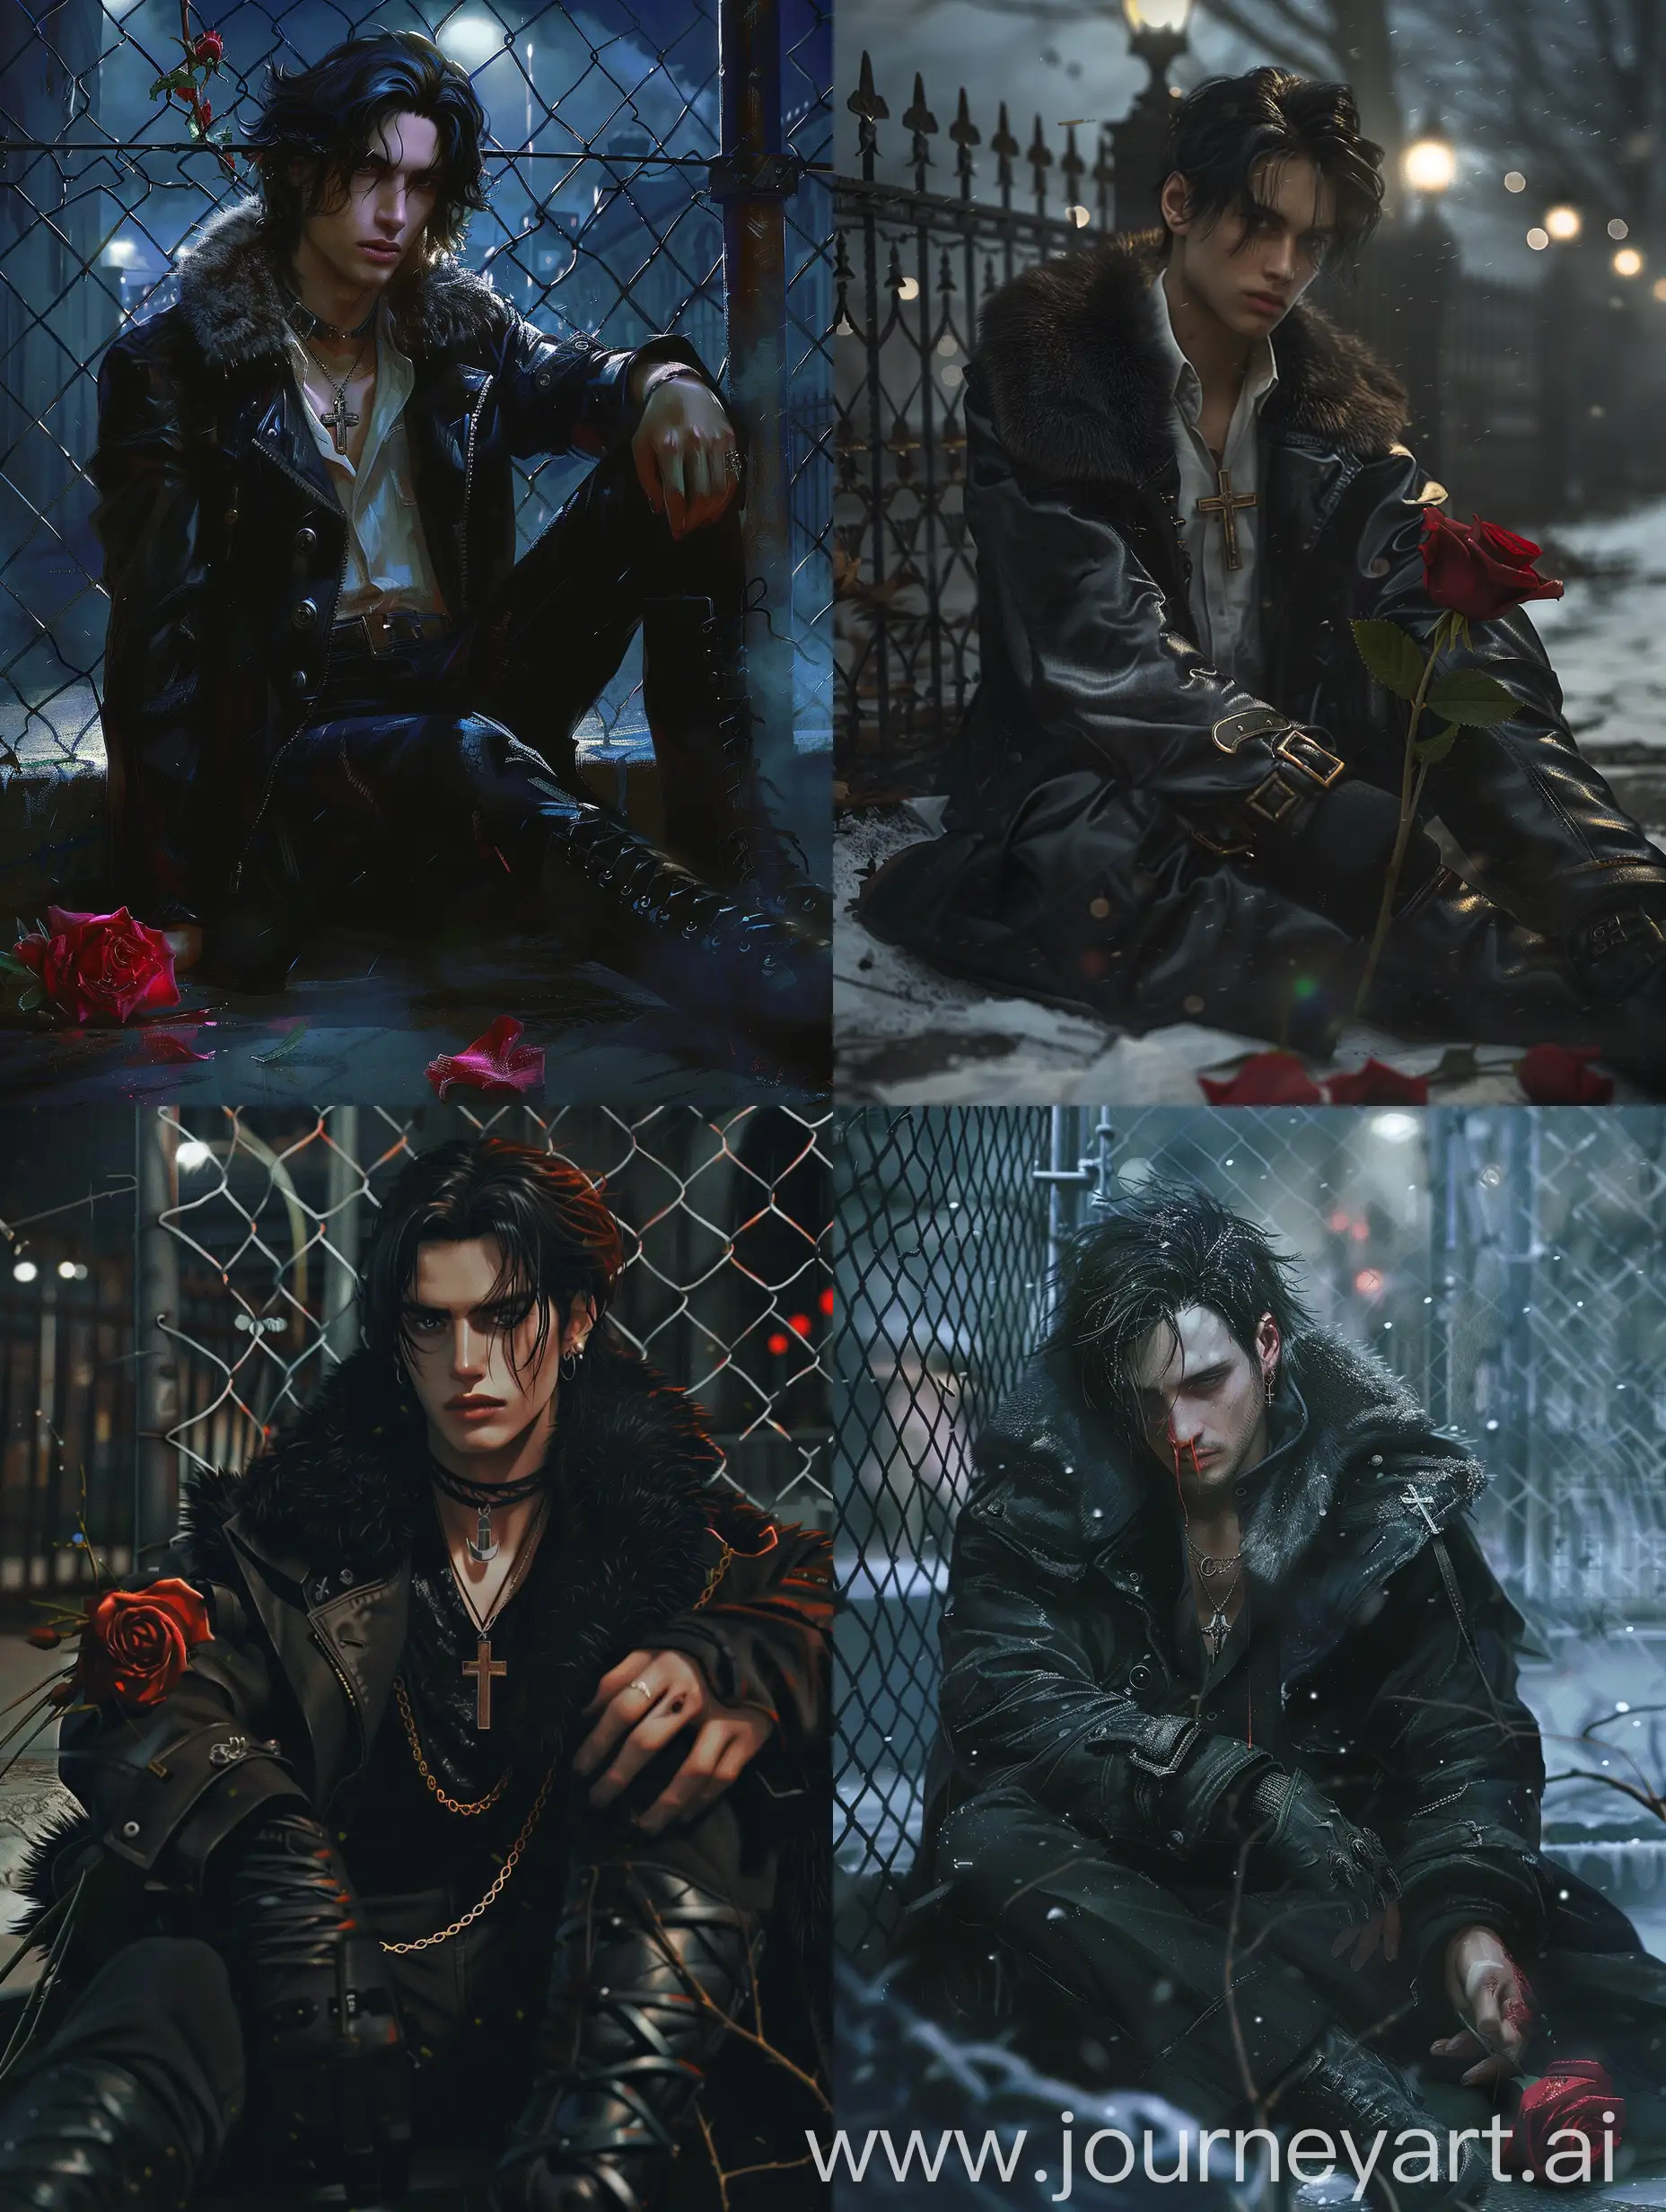 Photo, realism, realistic, 1guy, European, sitting on the ground, sitting half-sided, dark hair, brown eyes, black coat, fur collar, white shirt, high boots, red rose in hand, cross on the collar, night city in the background, mesh fence in the background.